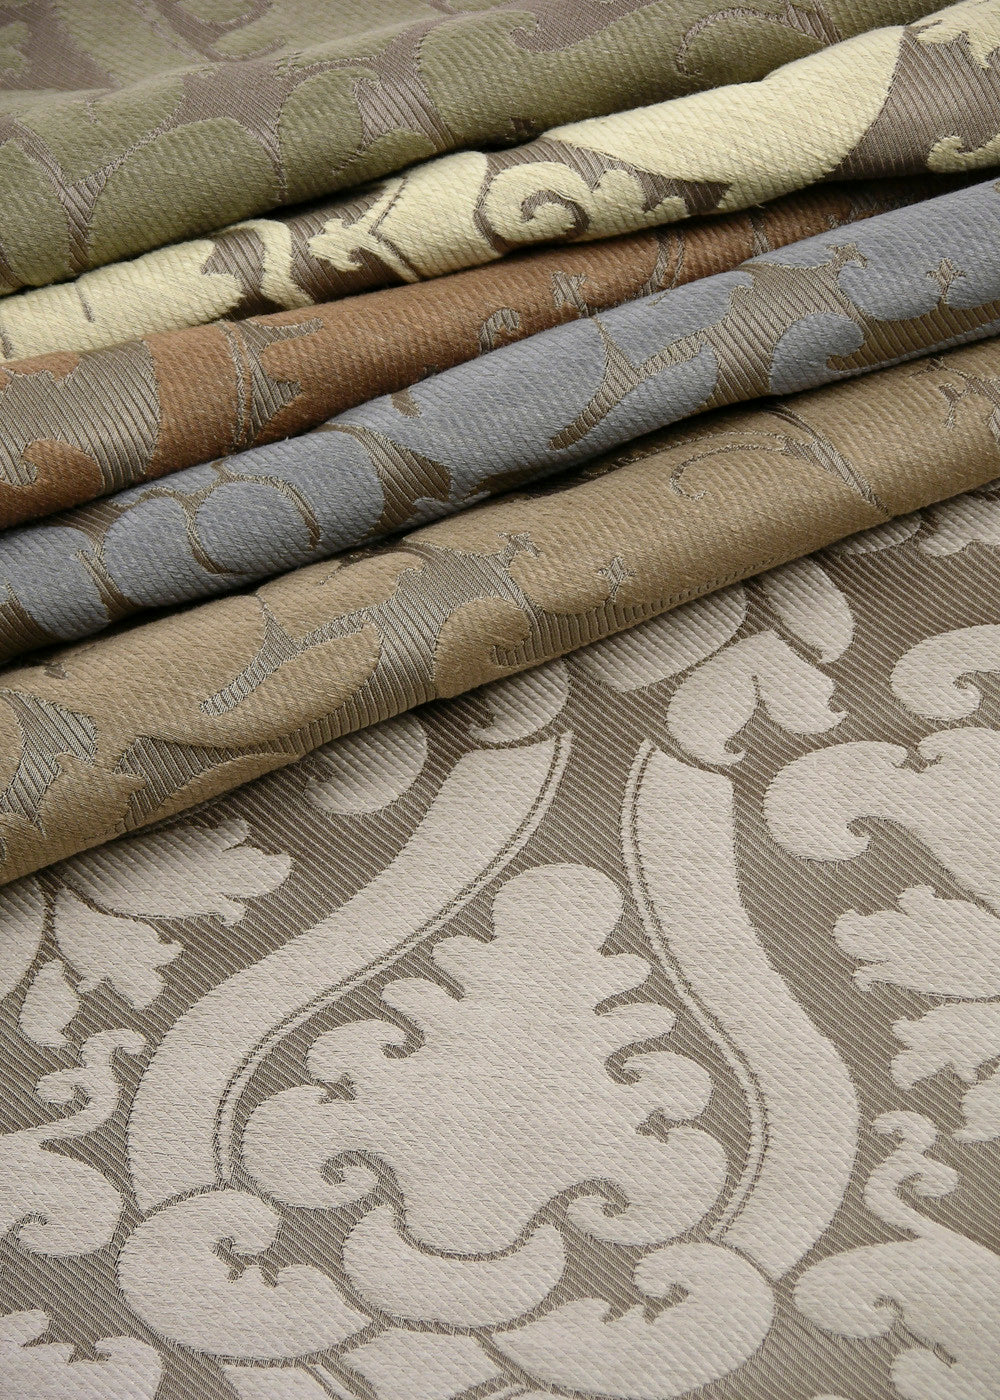 stack of fabrics with a woven damask design